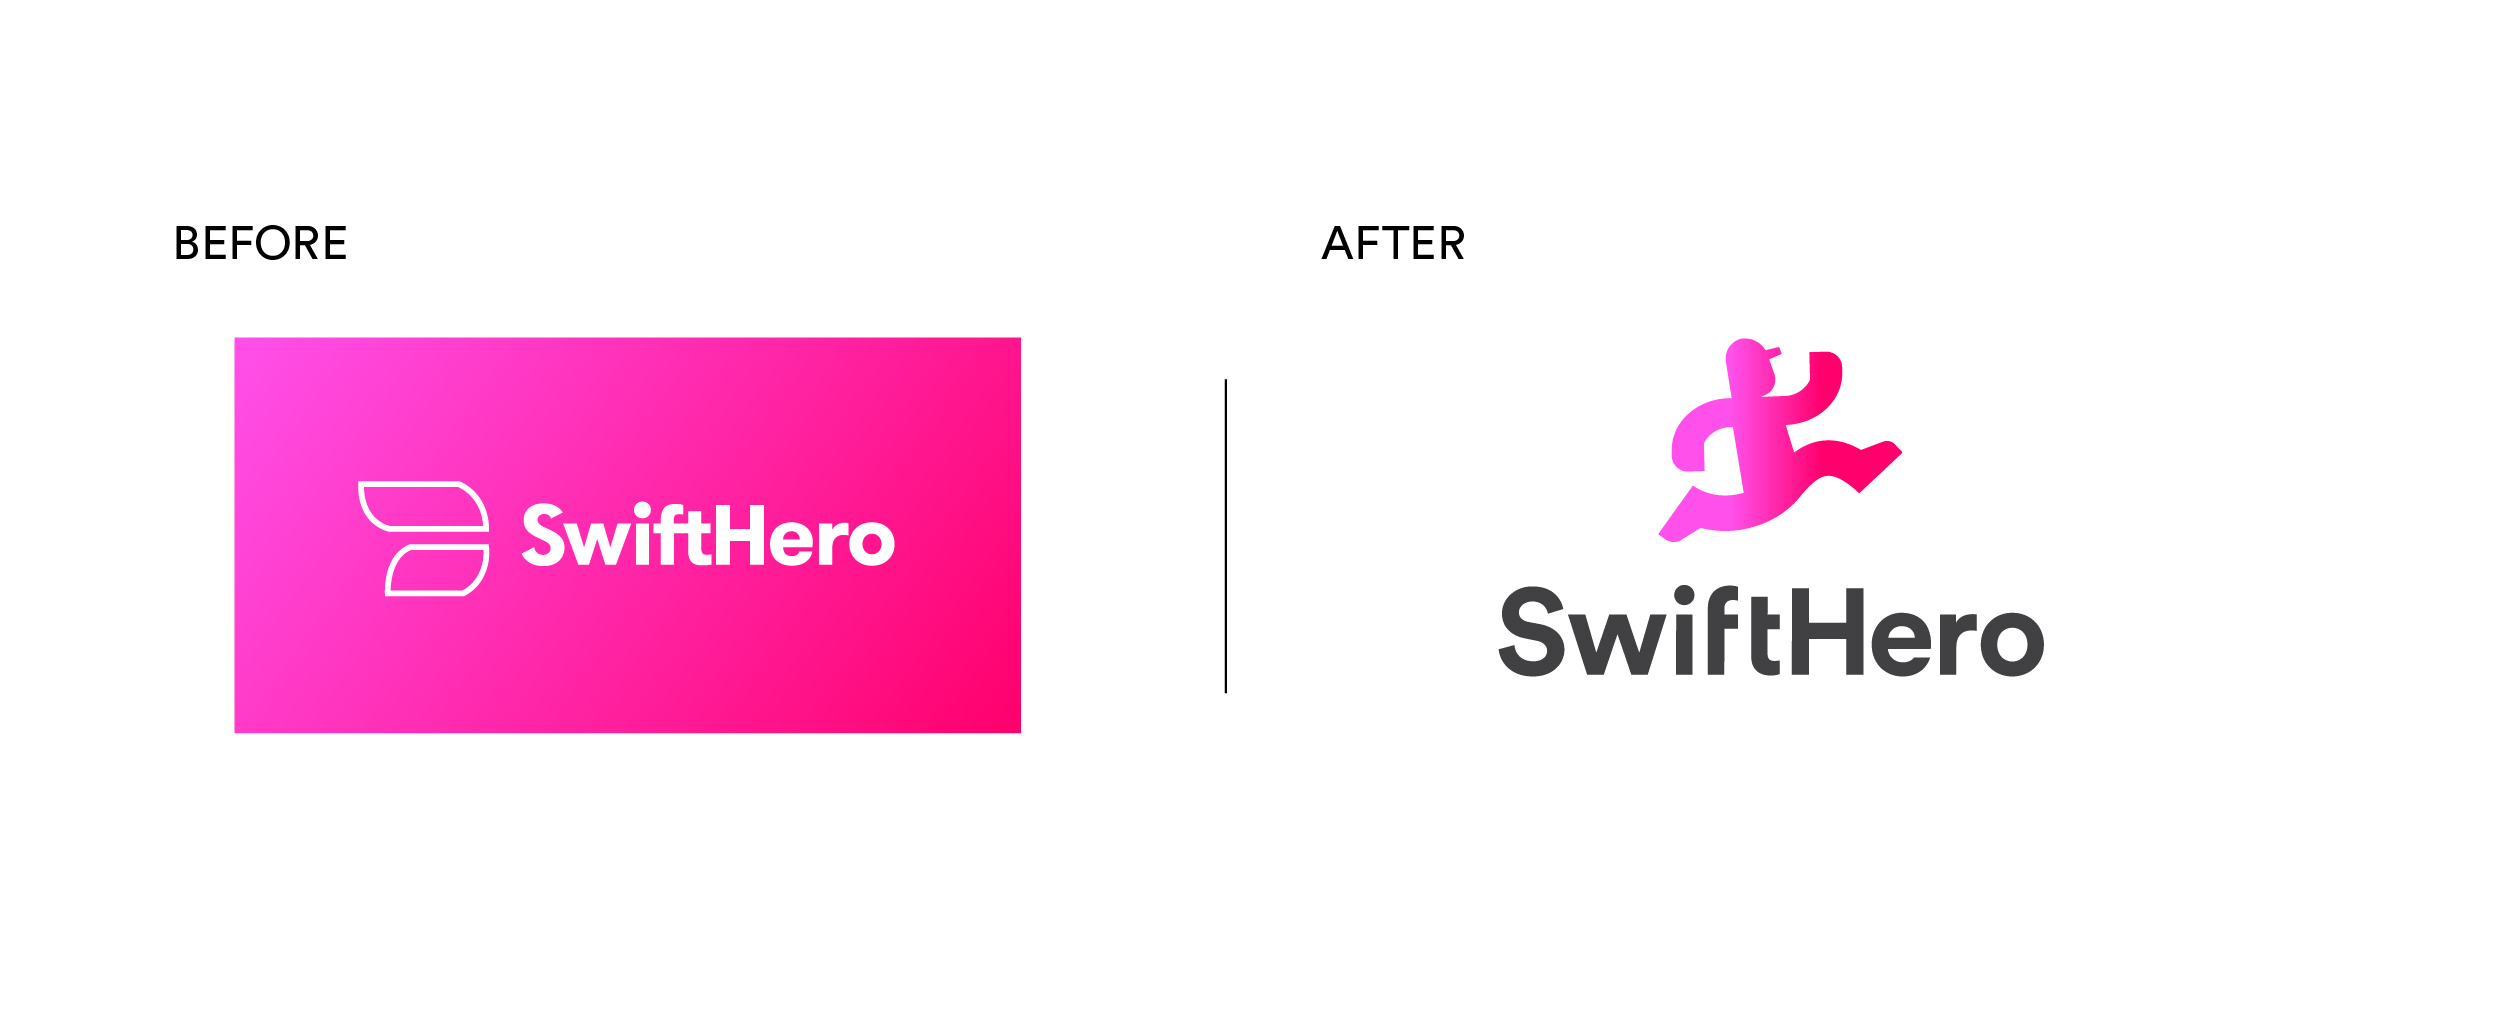 Swift Hero Brand Mark before and after brand refresh